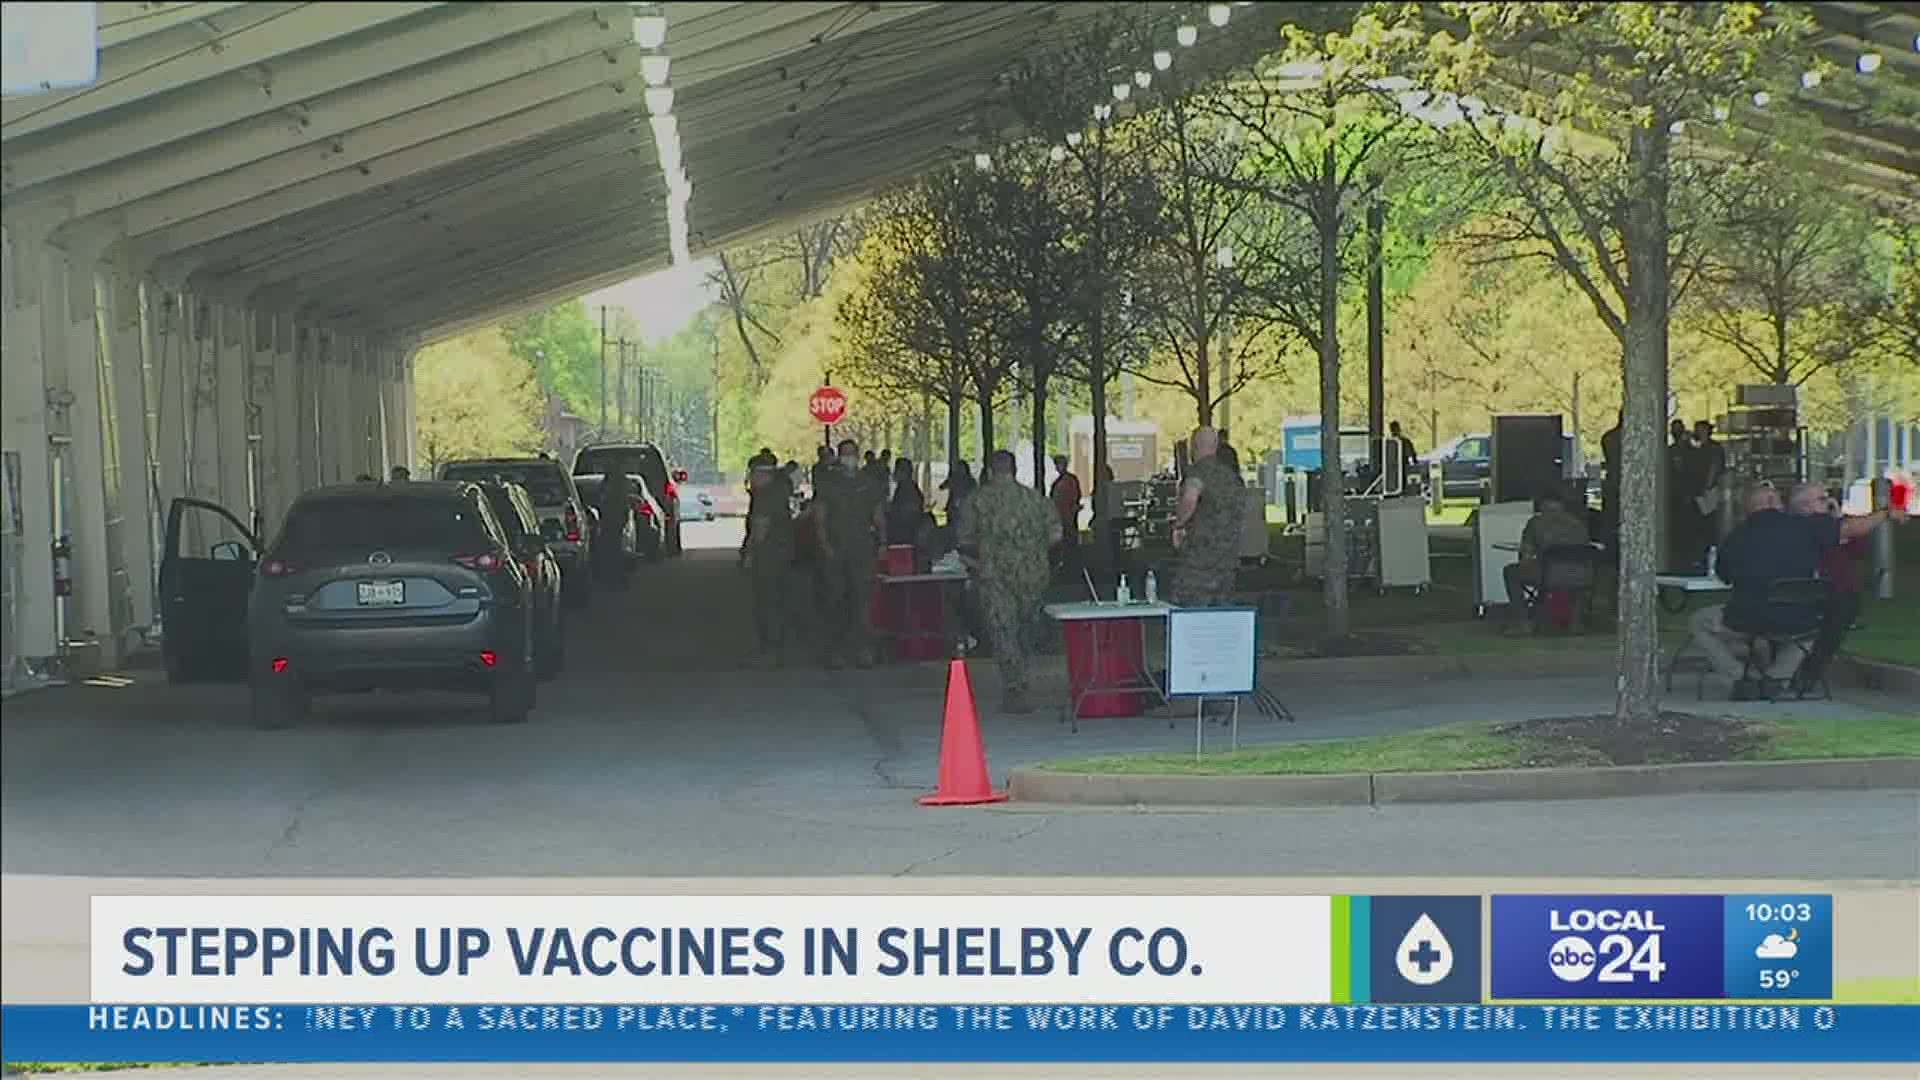 Stepping up vaccines in Shelby County